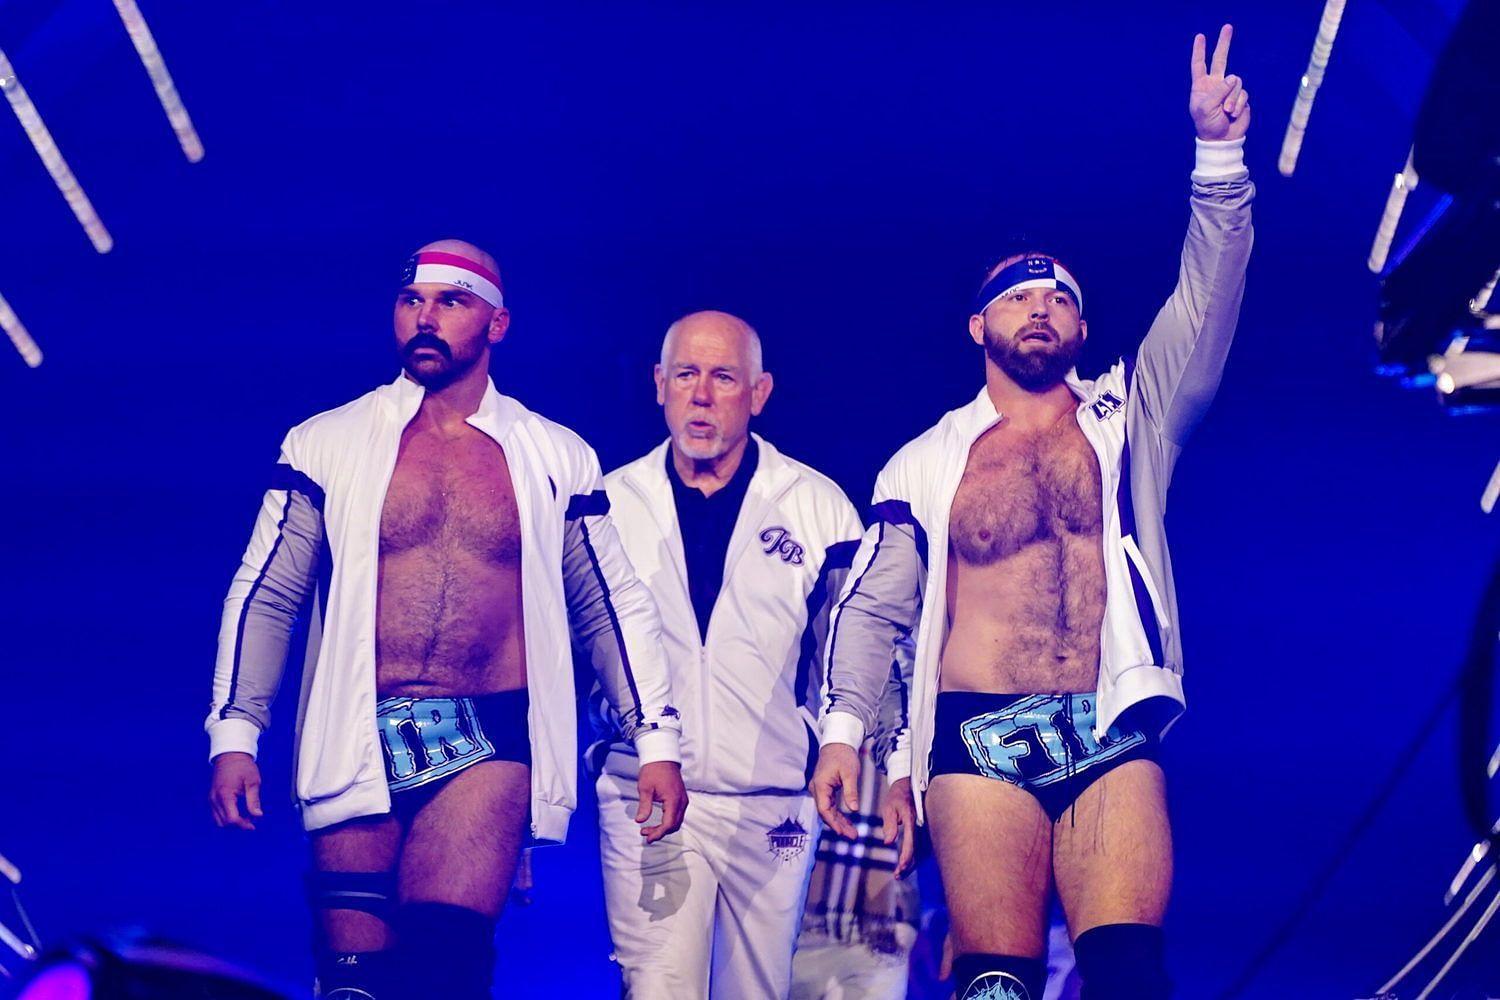 FTR are former AEW Tag Team Champions and the current AAA World Tag Team Champions.